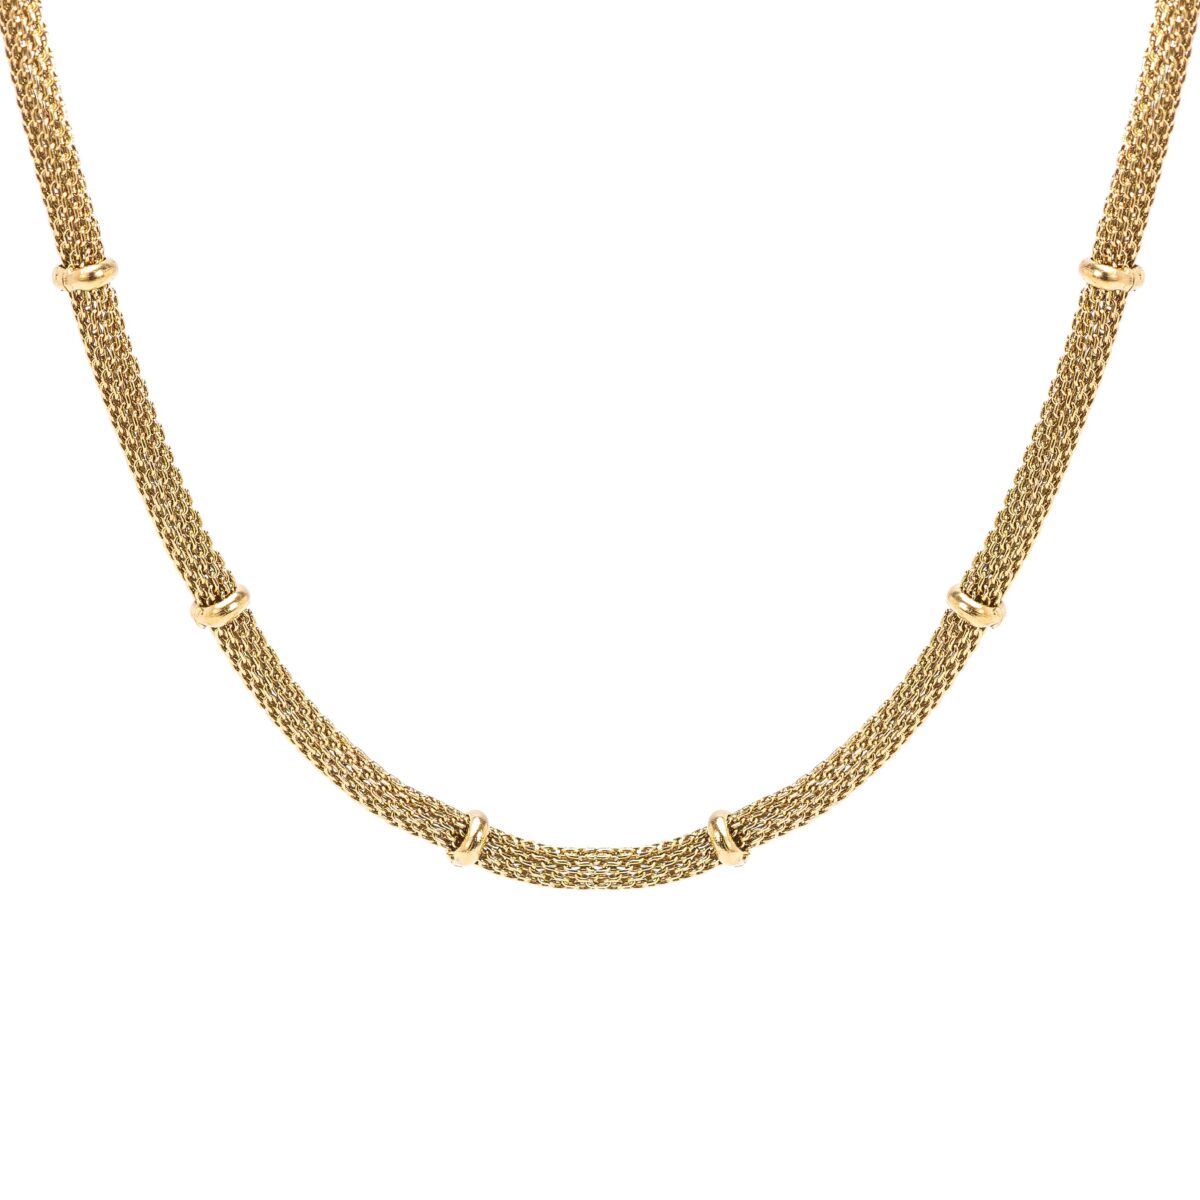 https://m.clubbella.co/product/bold-gold-chain-beaded-necklace/ Resized (7 of 134)